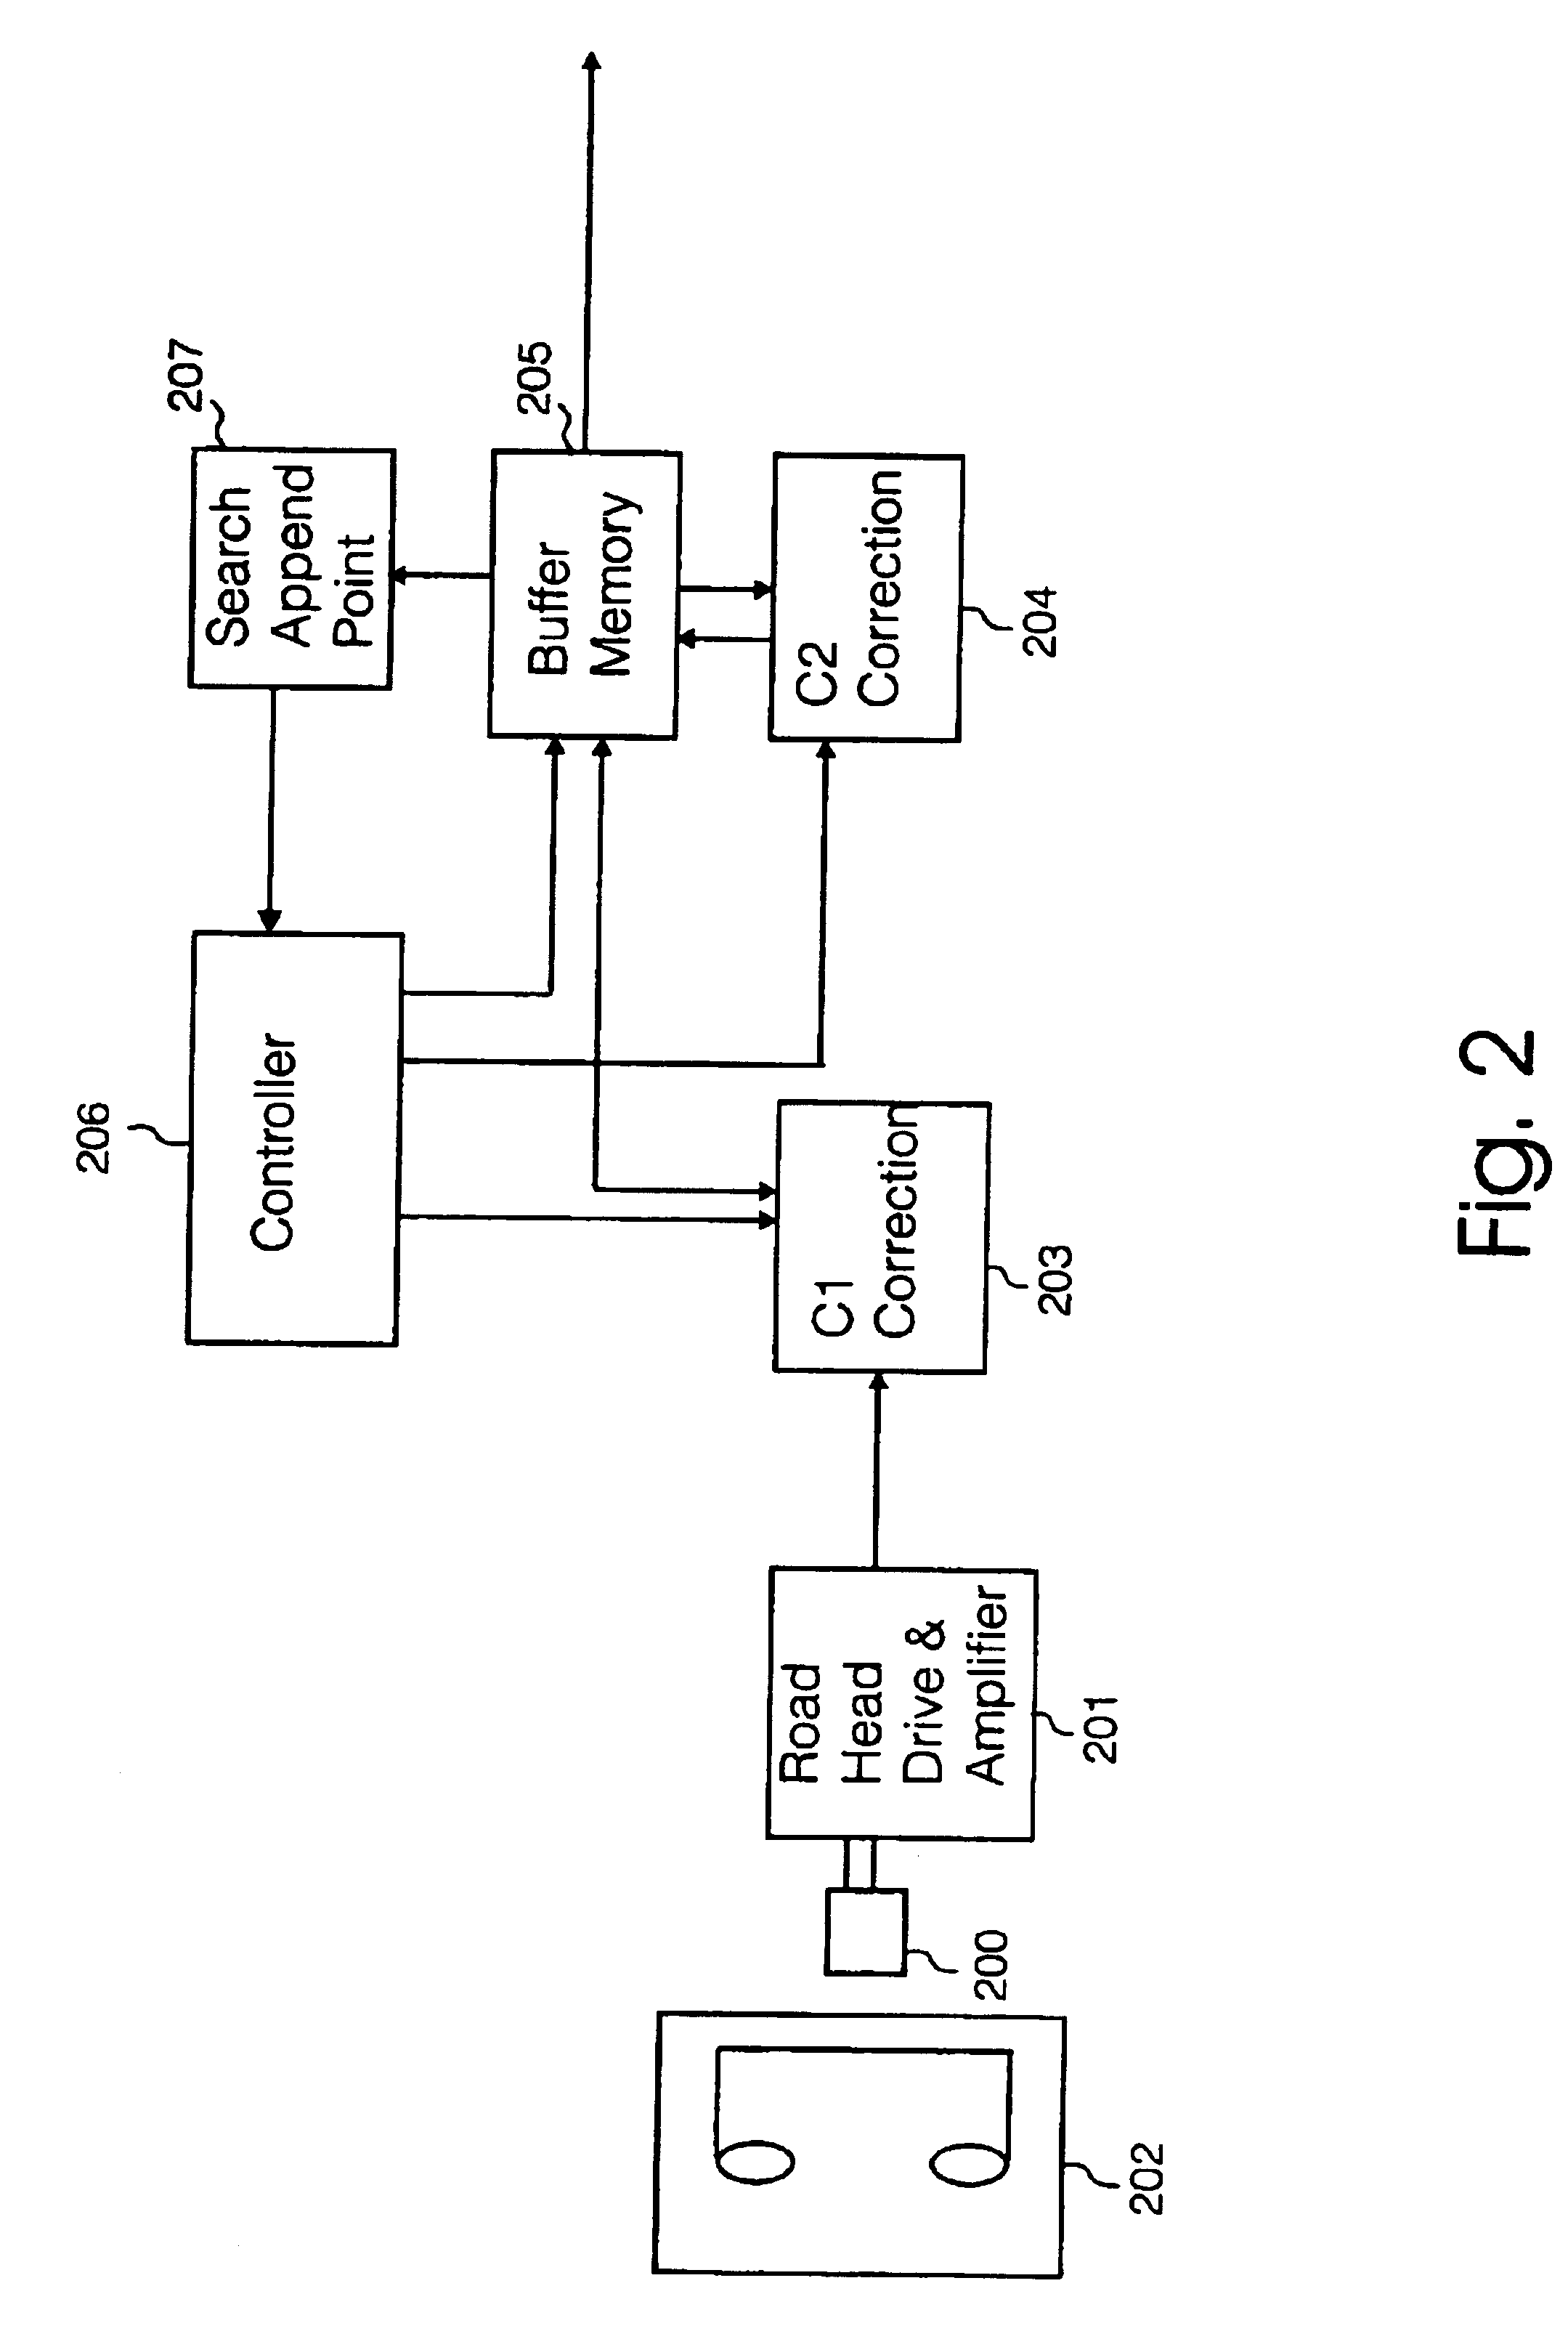 Searching for append point in data storage device